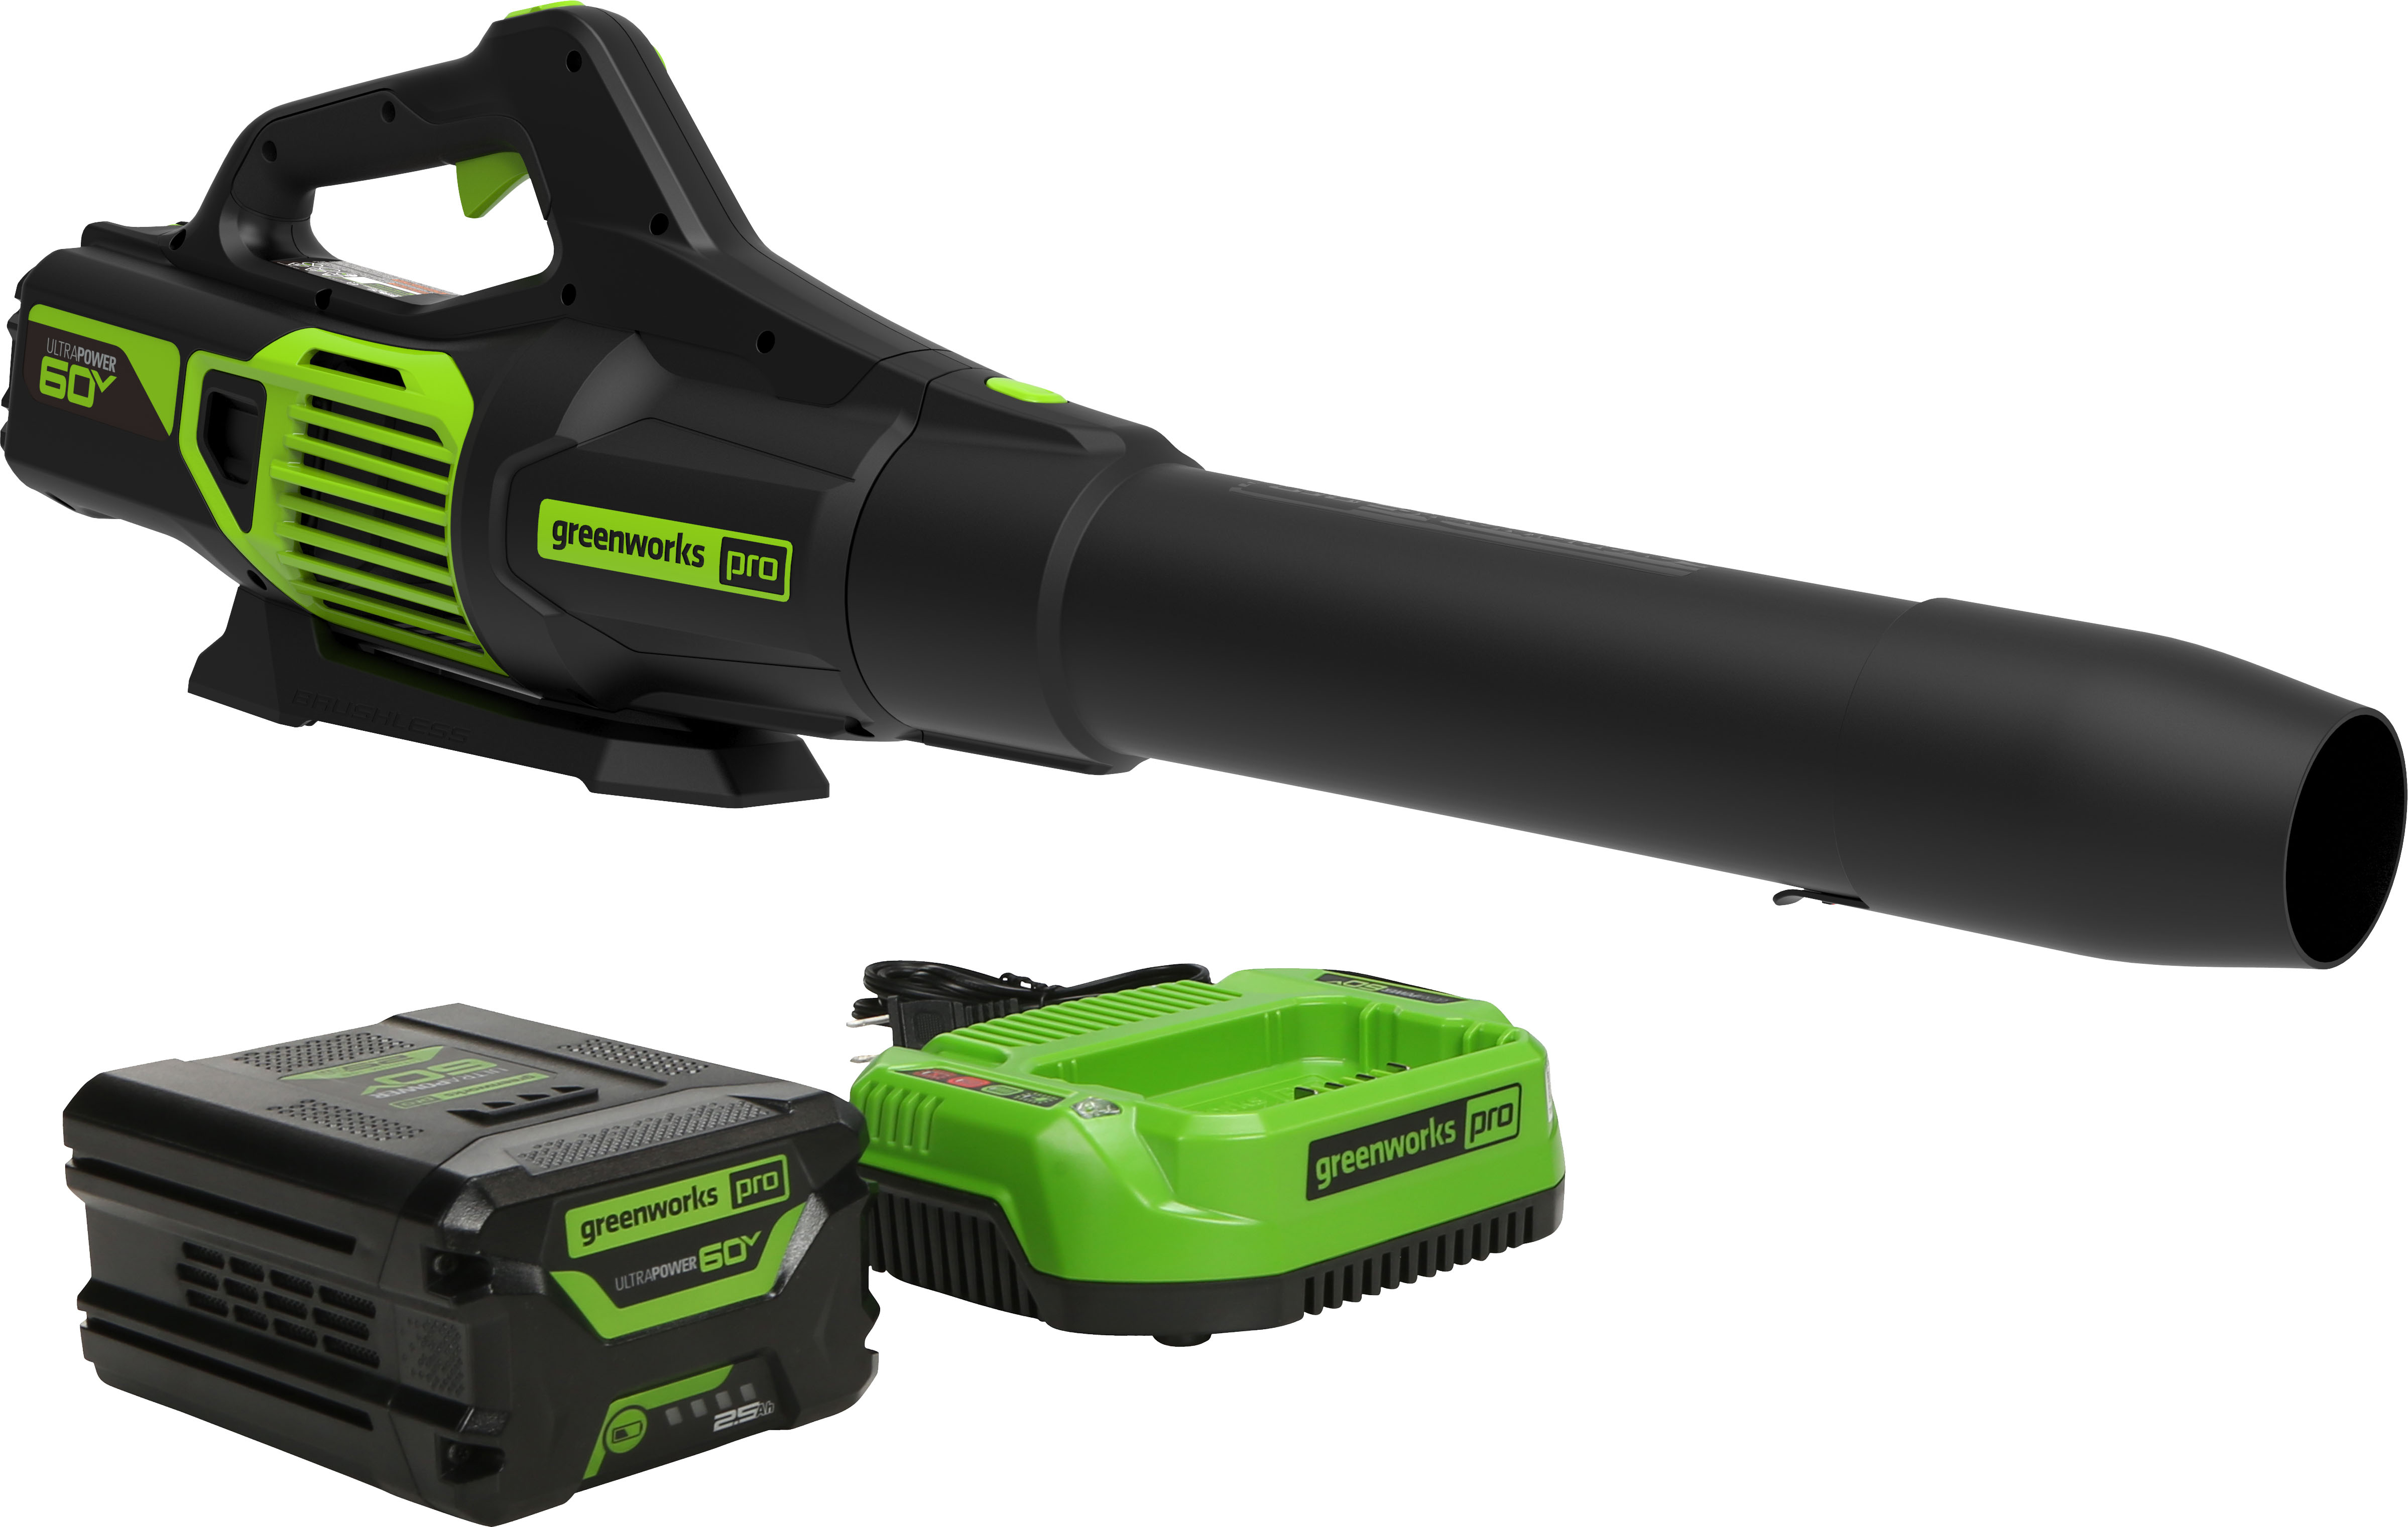 Angle View: Greenworks - 60V 2.5Ah 610 CFM Blower inludes battery and charger - Green